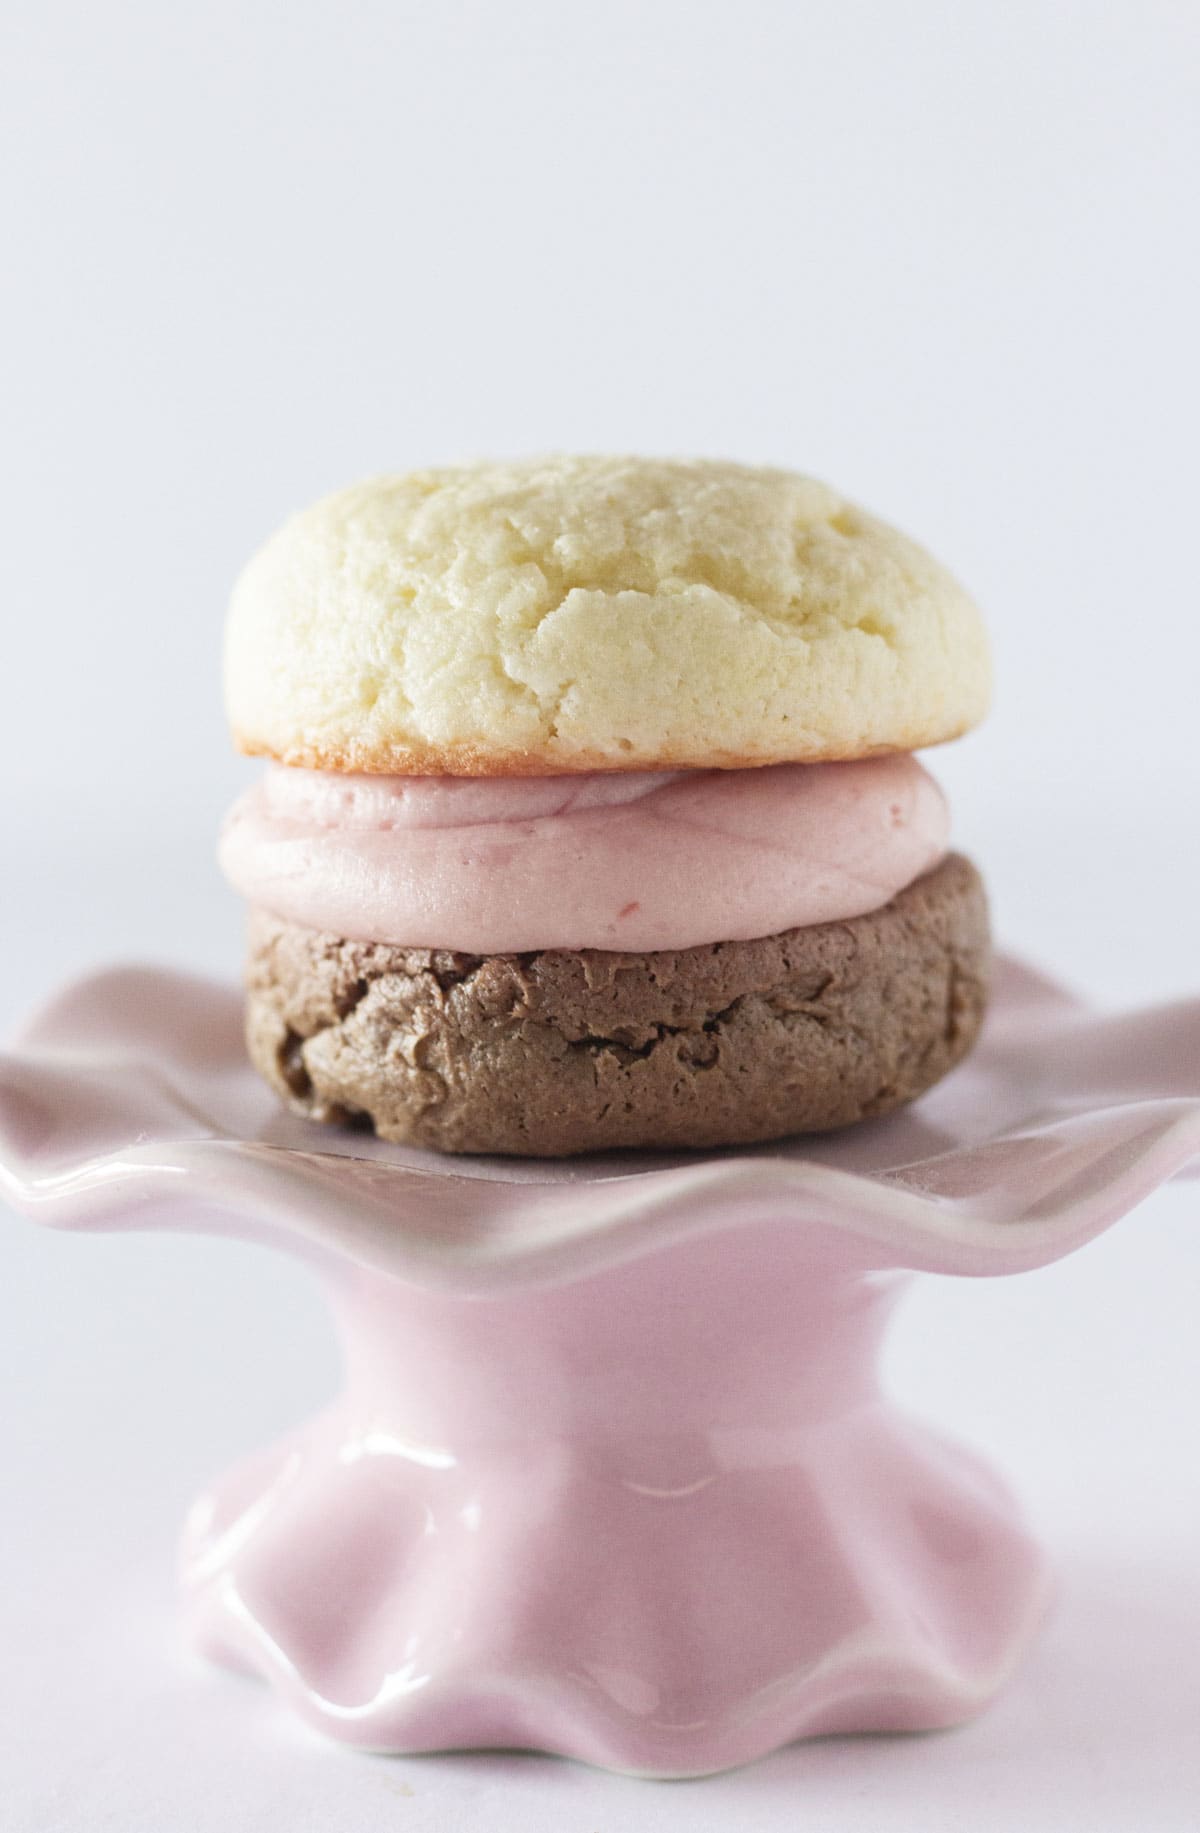 A cake mix Neapolitan cookie on a pink plate.